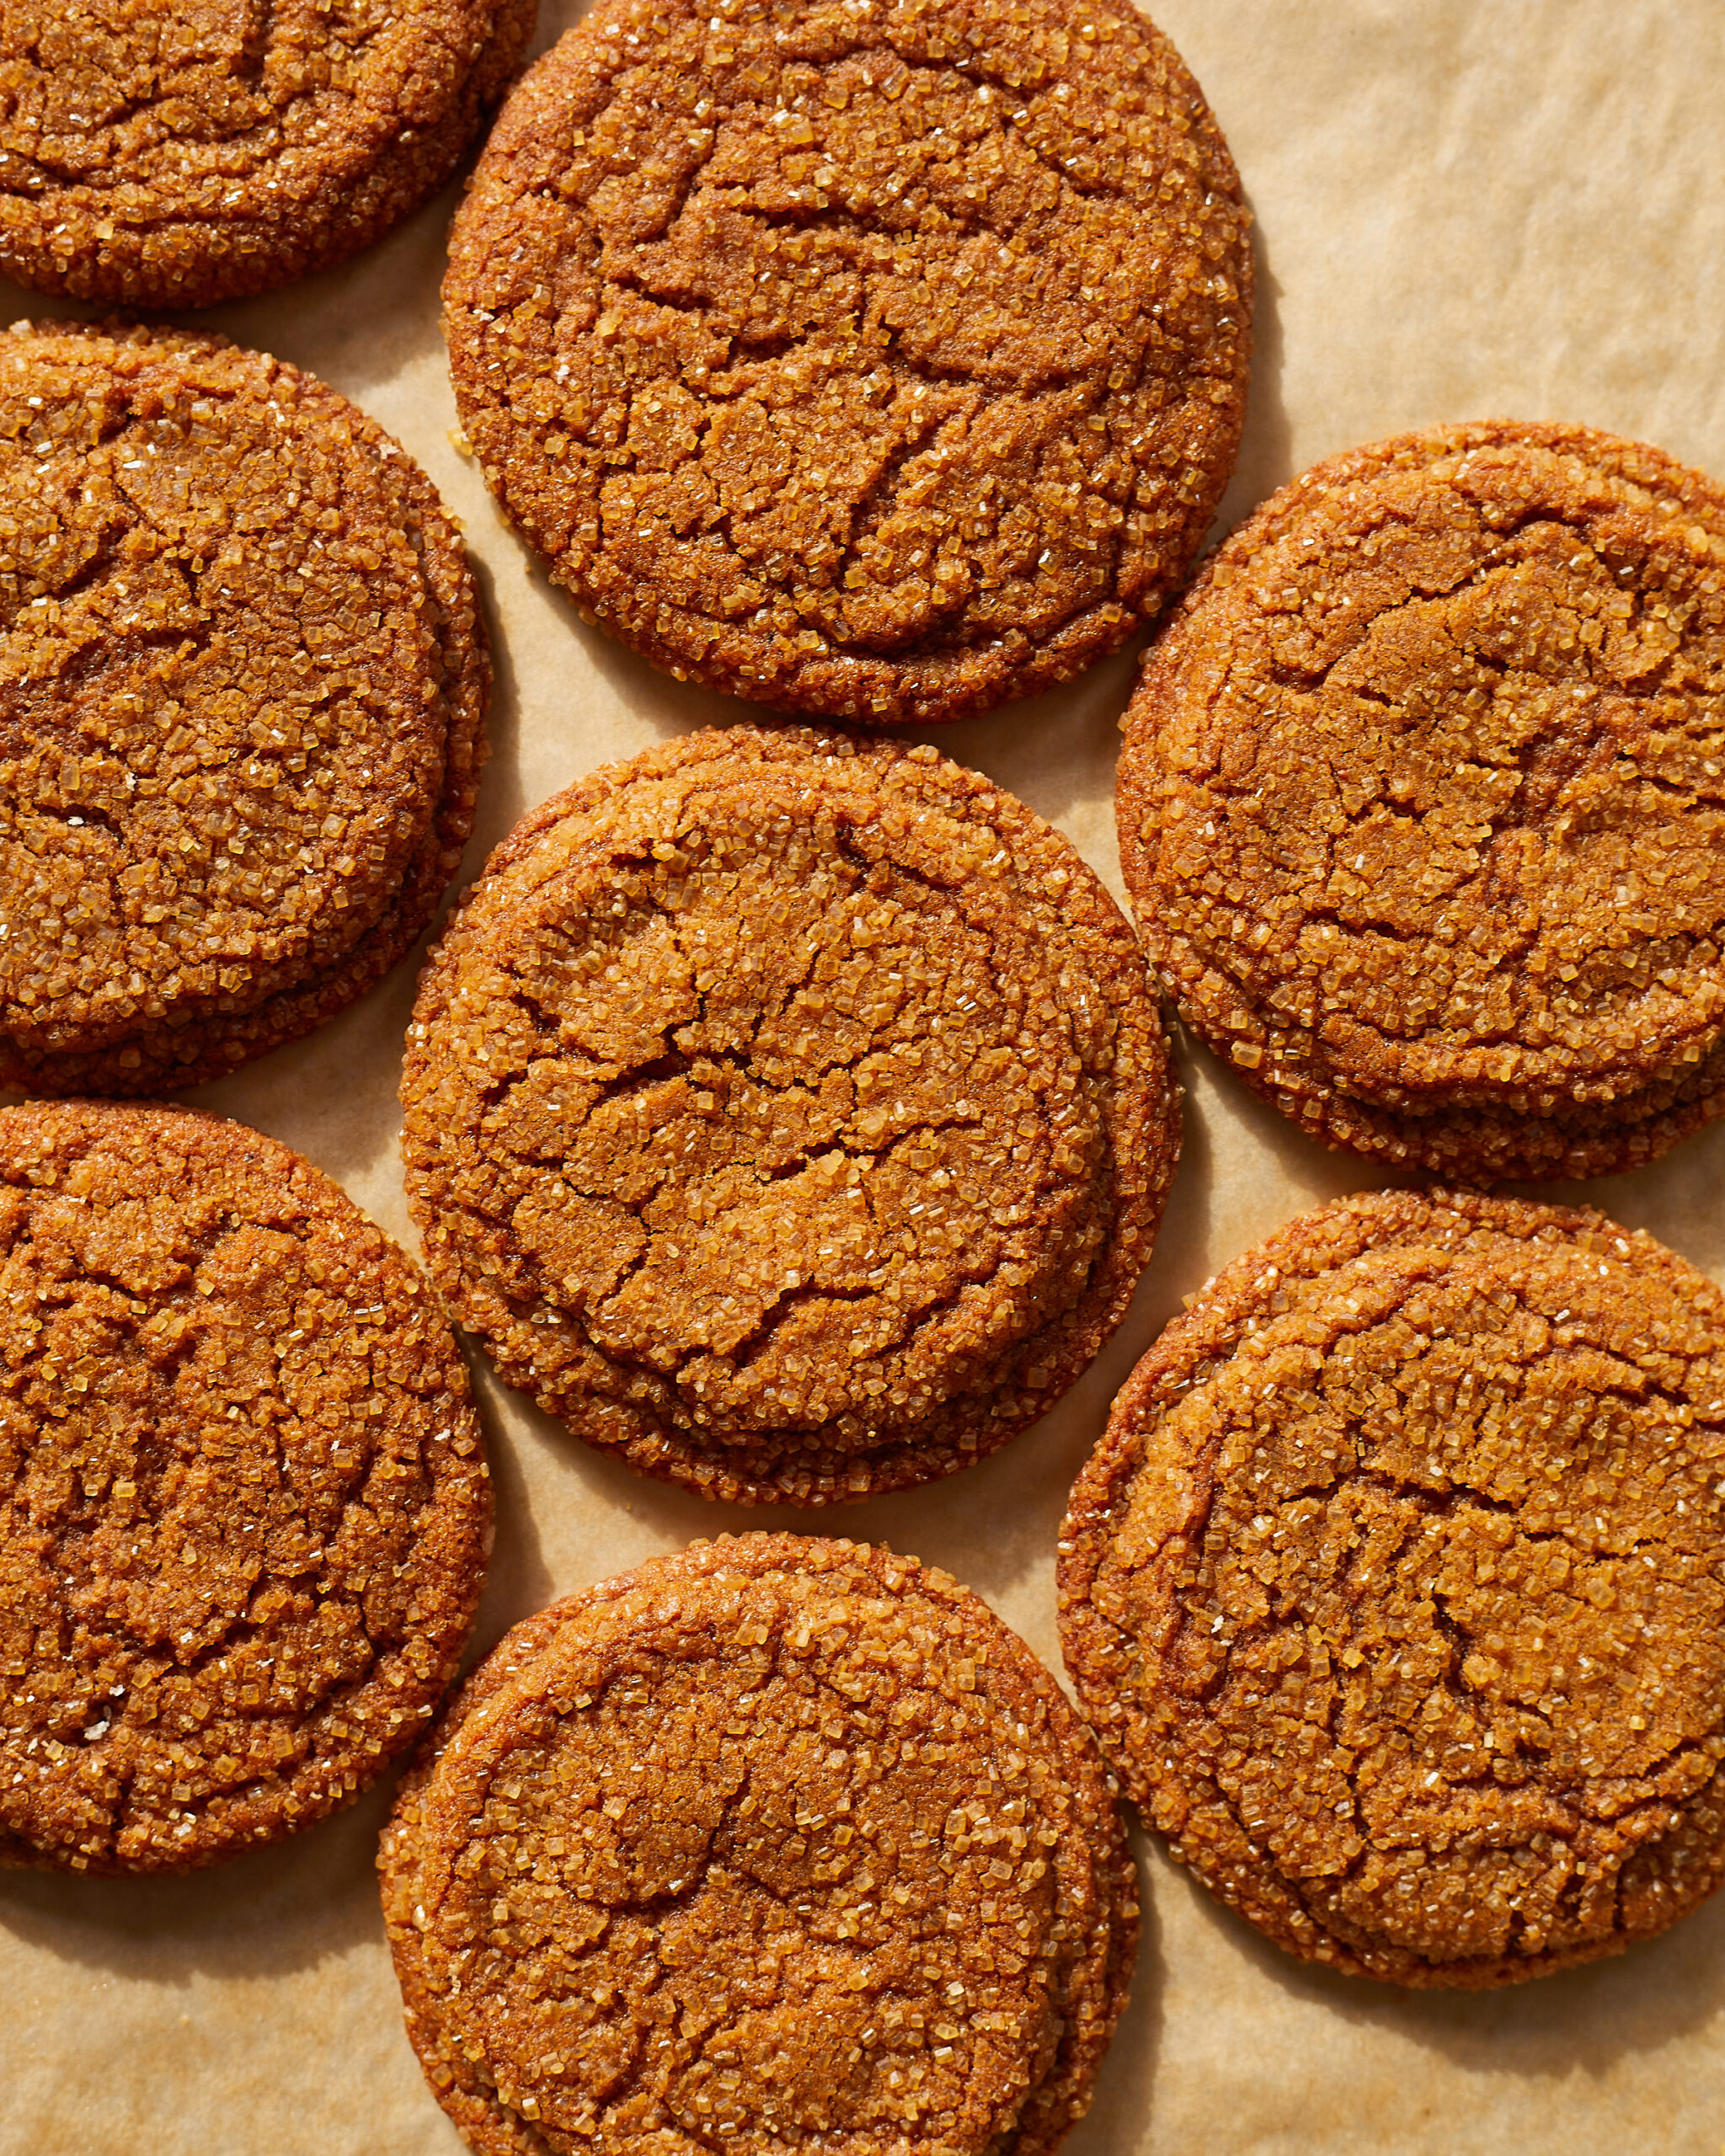 https://easygayoven.com/wp-content/uploads/2023/01/ginger-molasses-cookies-6-scaled.jpg